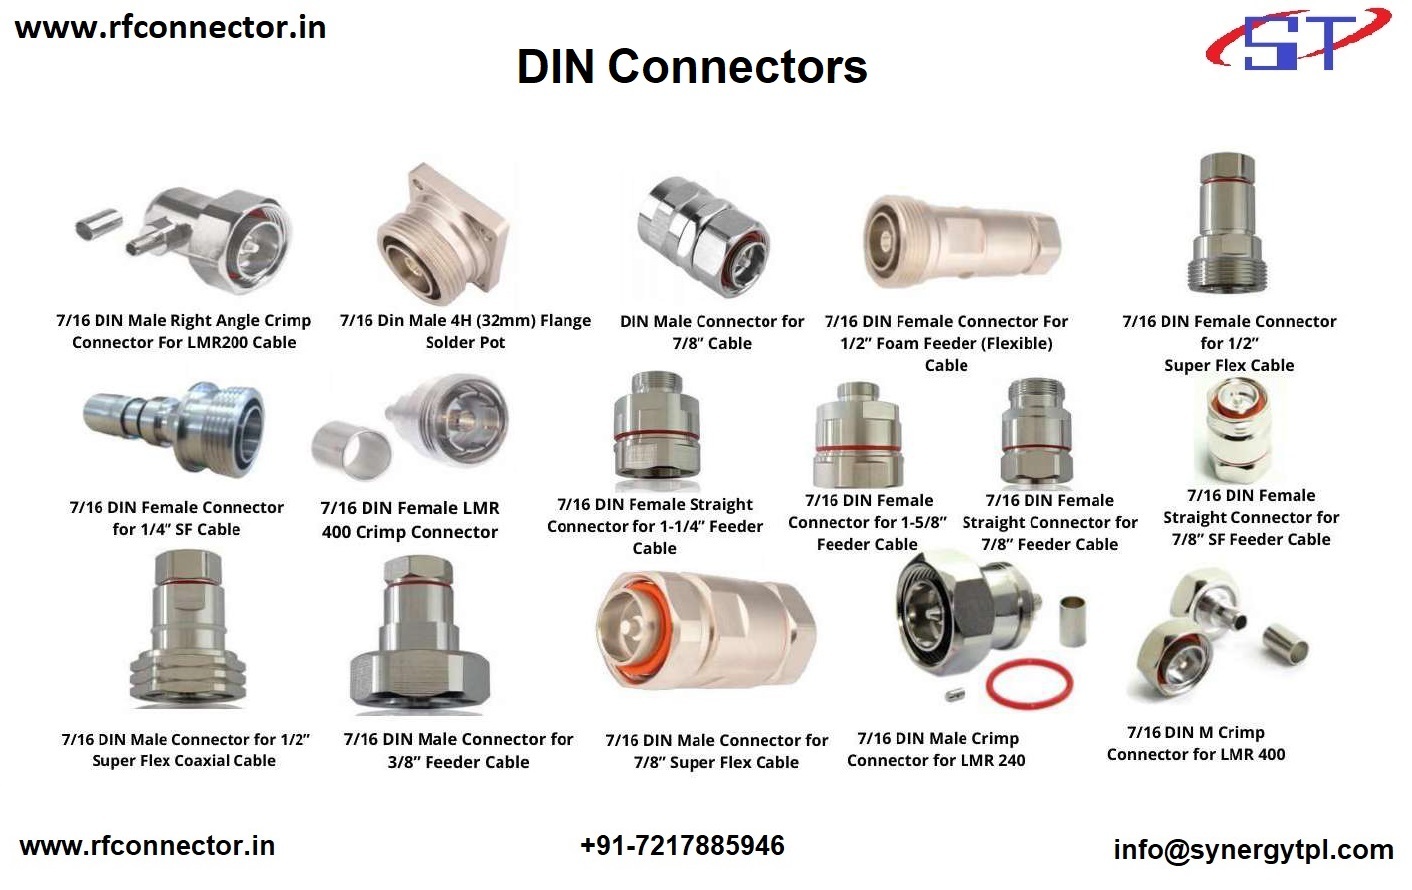 DIN Male RIGHTANGLE FOR 1-2- FEEDER SOLDER CONNECTOR